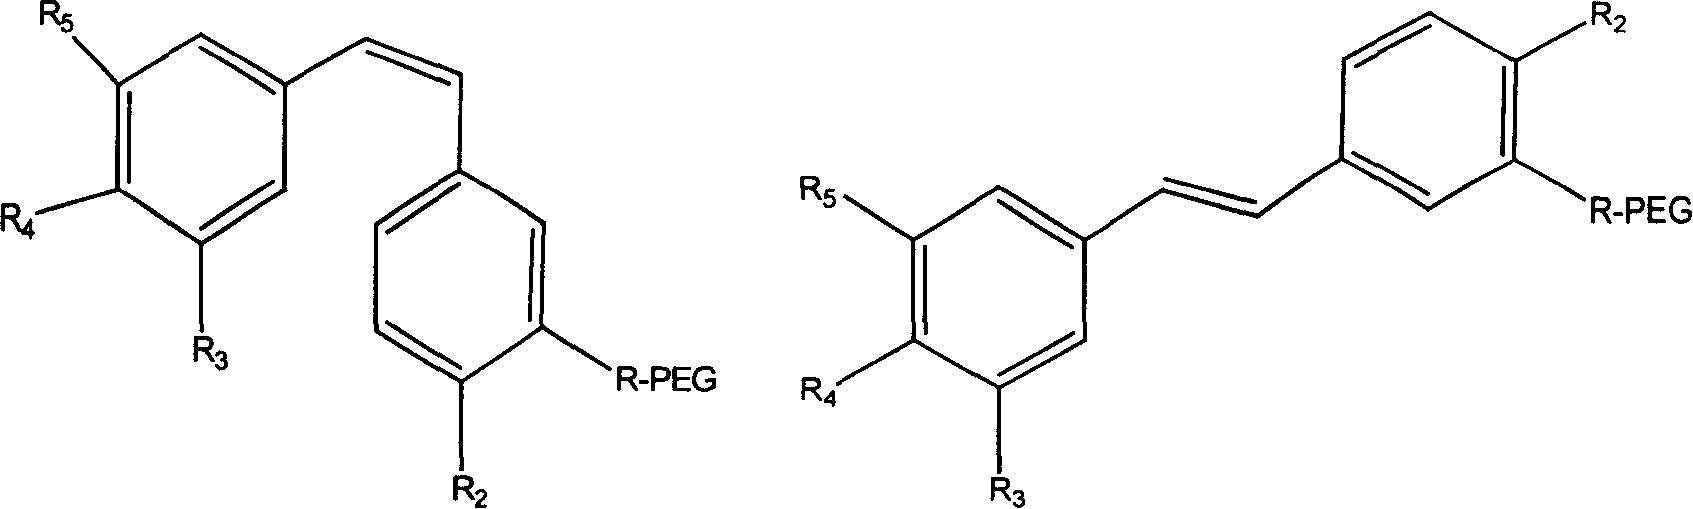 Polyglycol modified antitumor compound and its preparing method